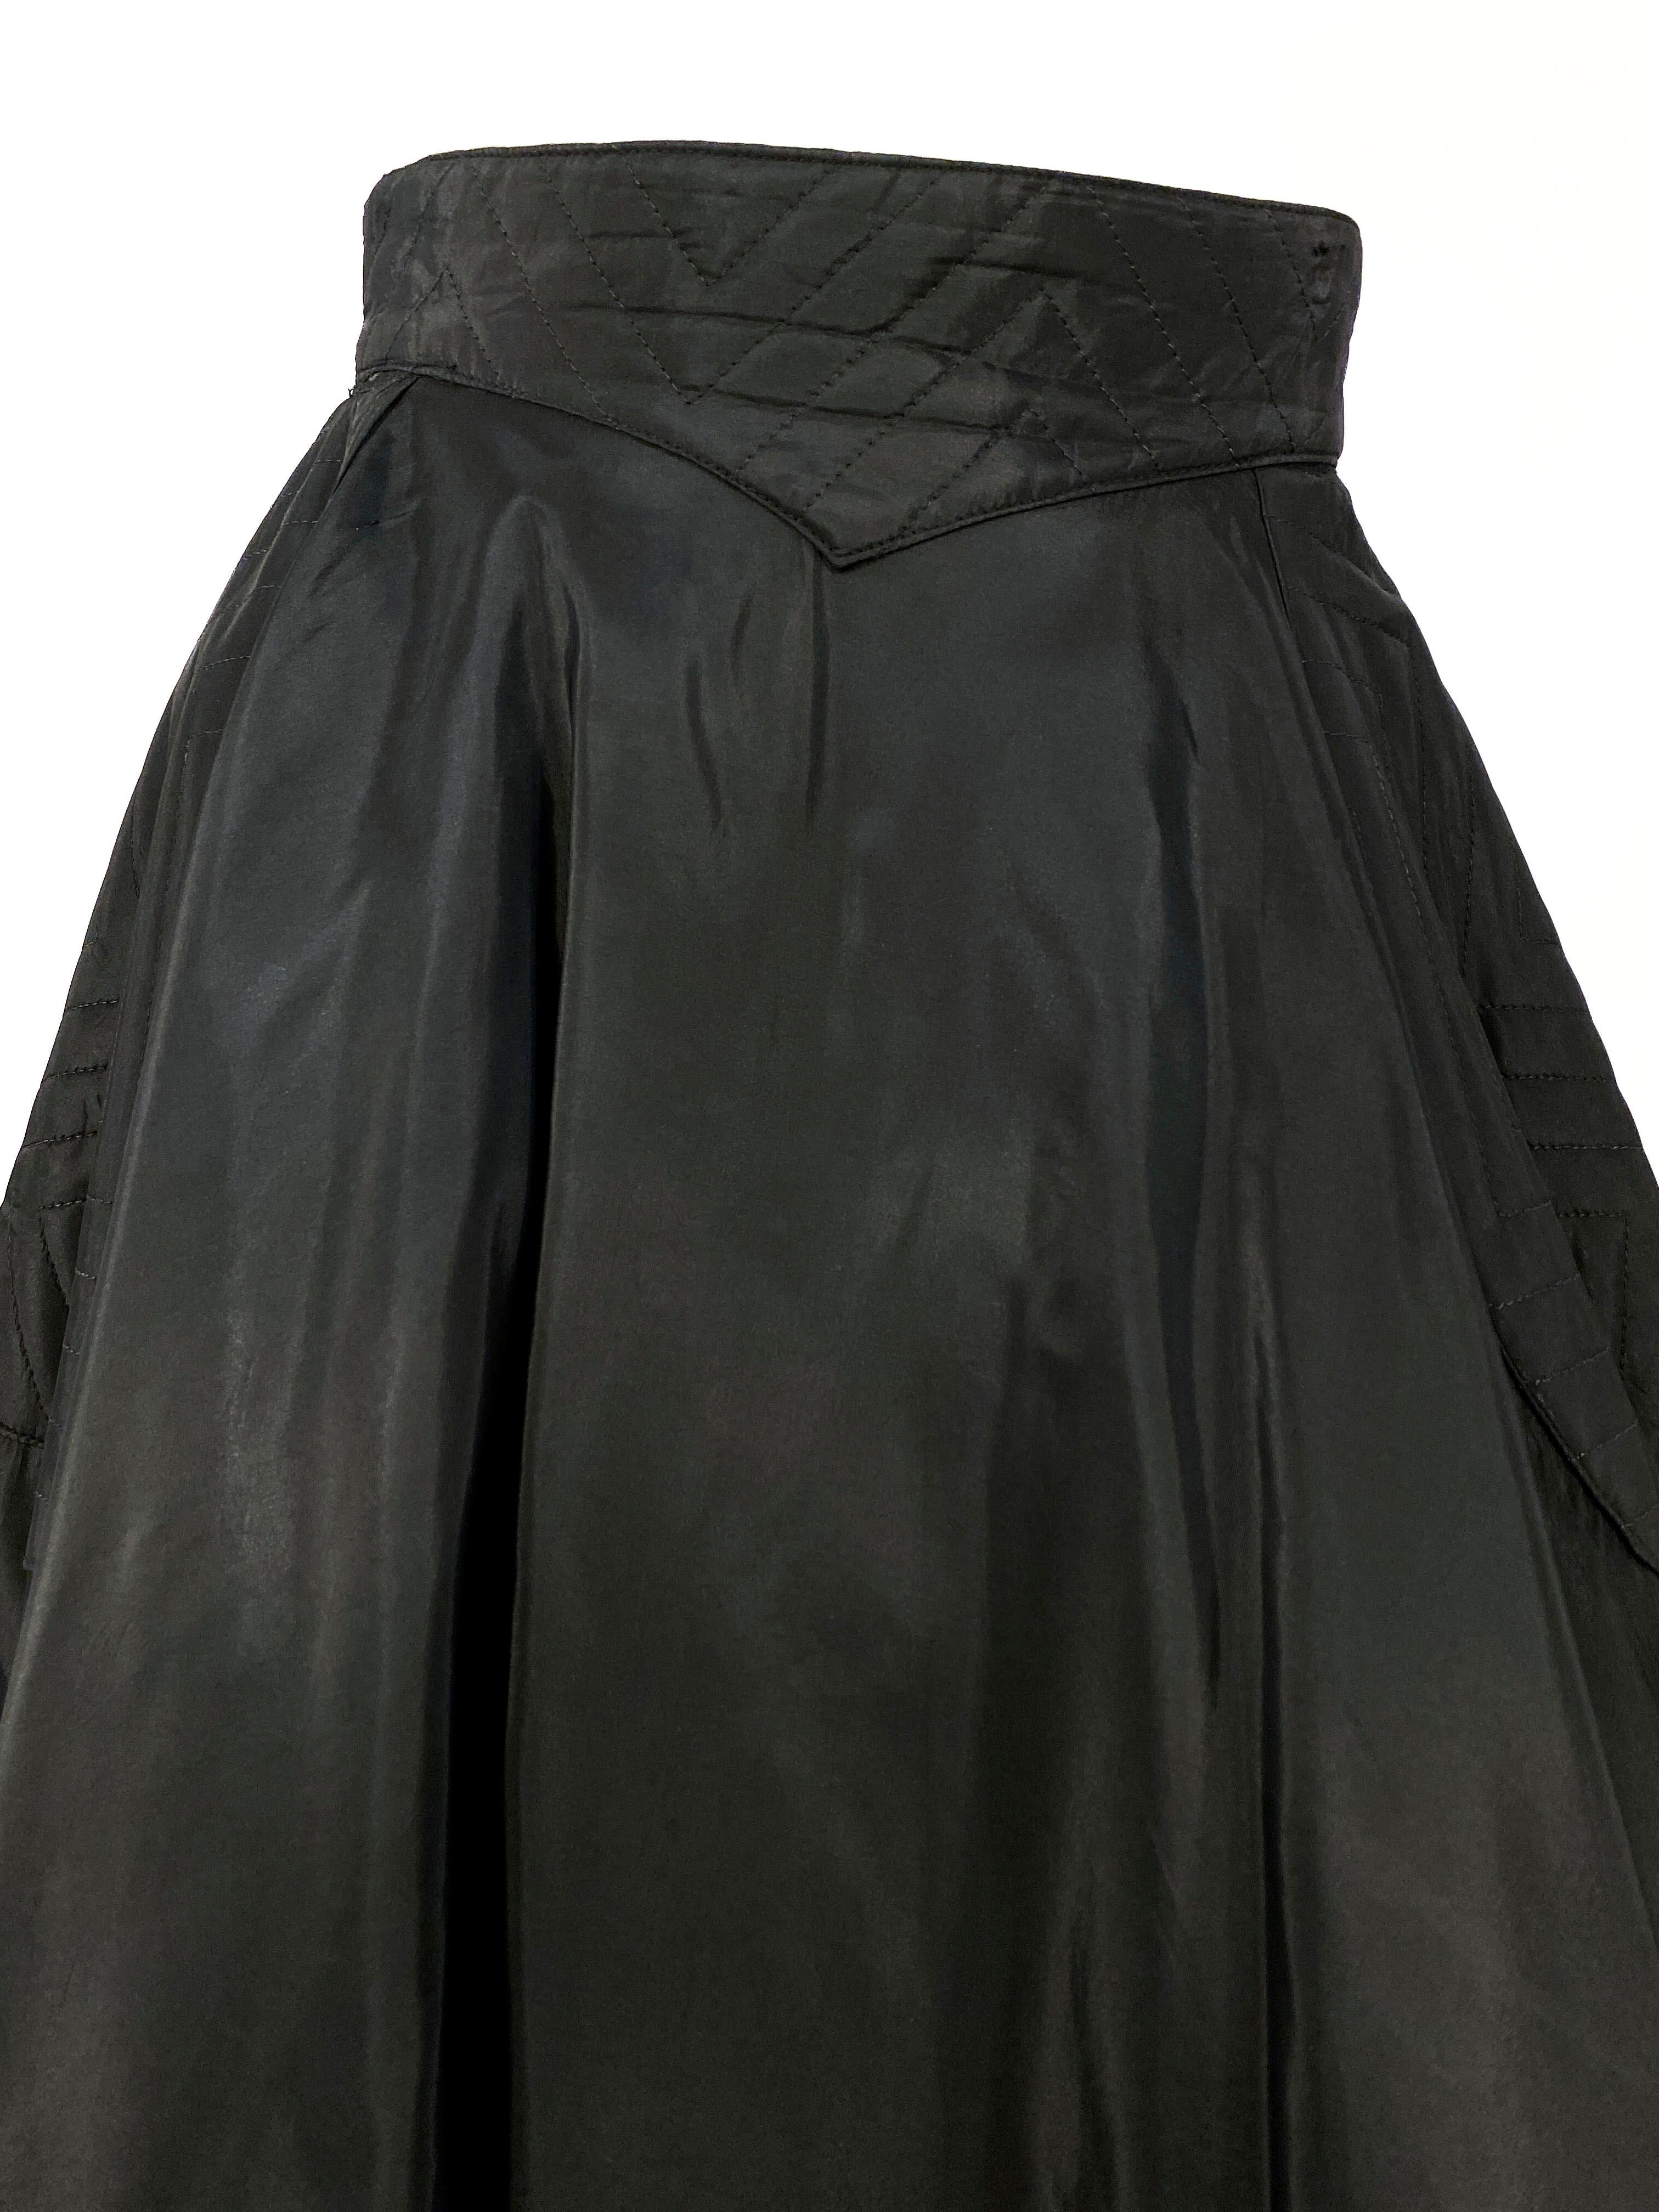 1950s black taffeta full circle skirt with quilted waist band, enlarged pockets, and wide bordered hem. This piece is meant to be worn with a full petticoat and is photographed with one that is not included in the purchase.